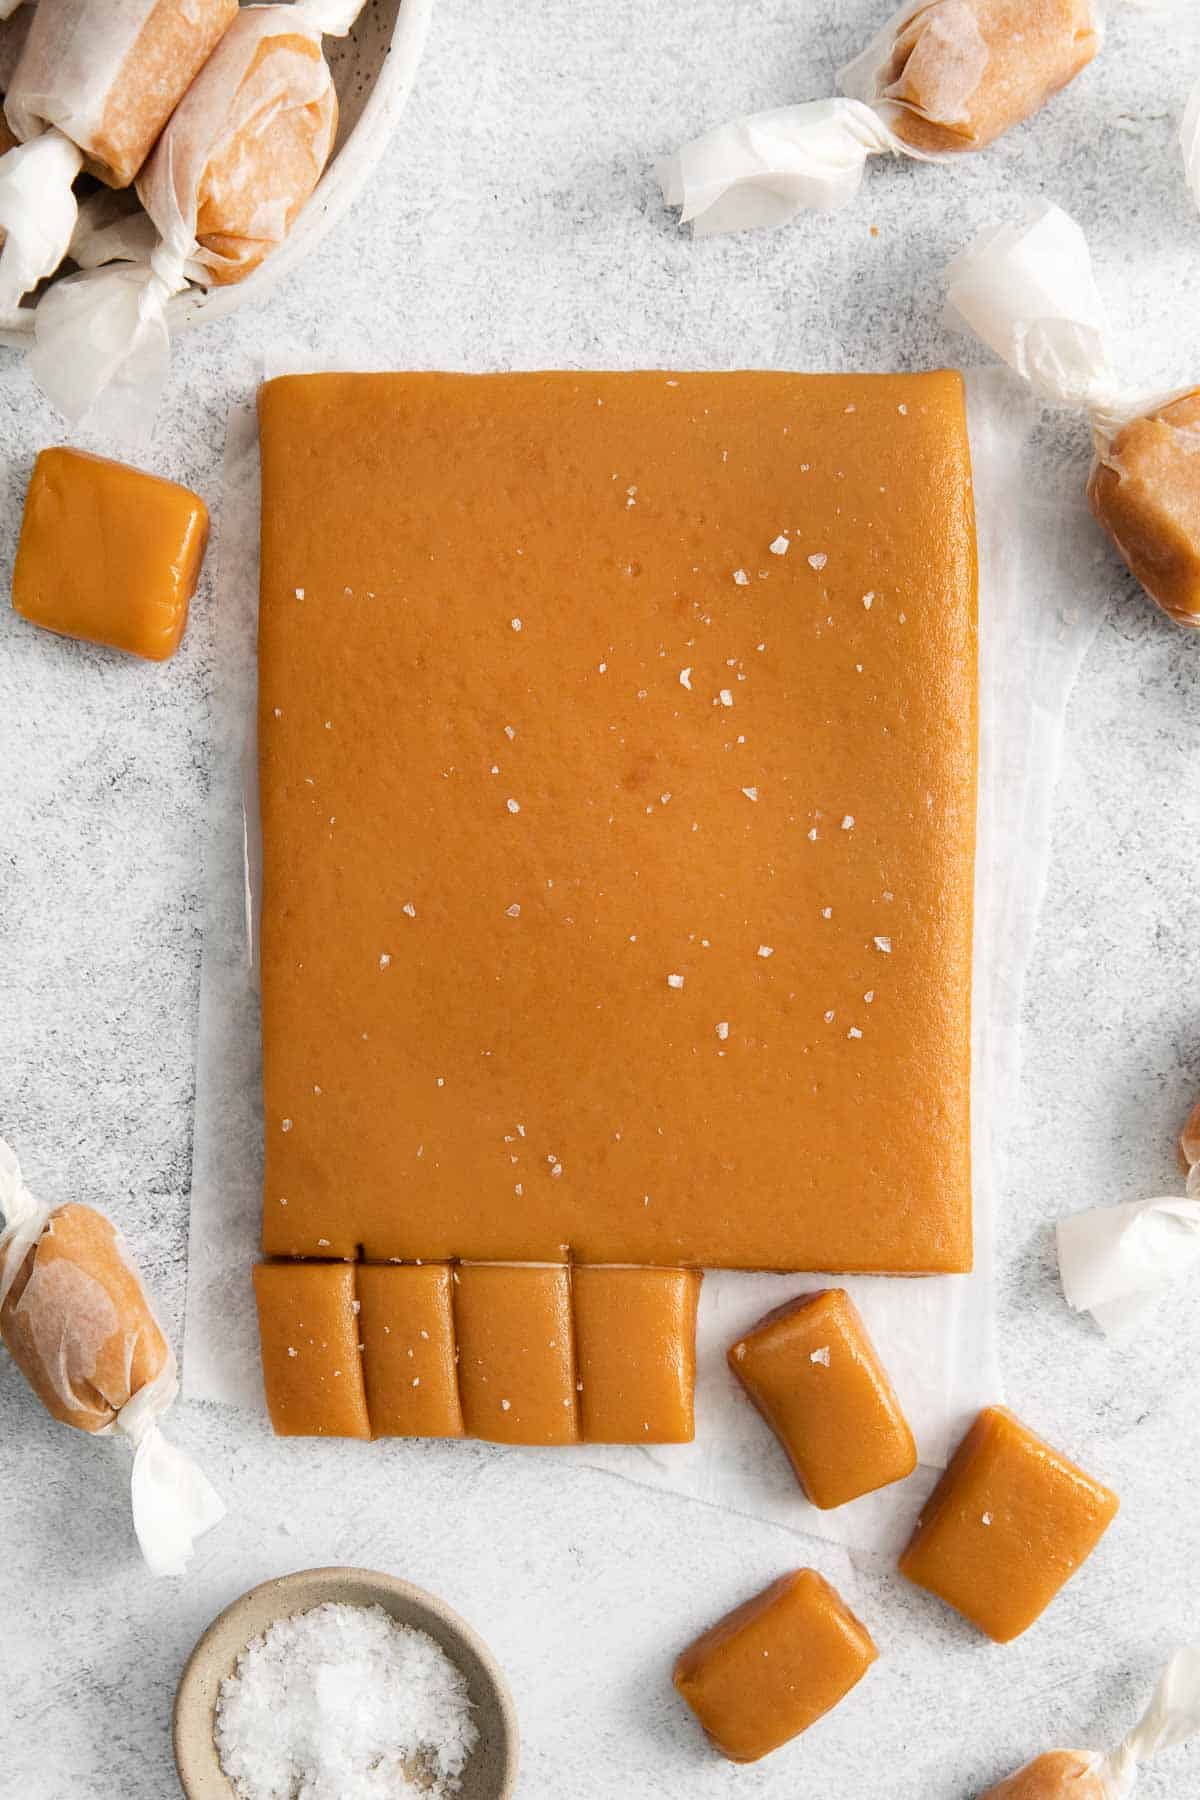 A slab of caramel being cut into individual portions